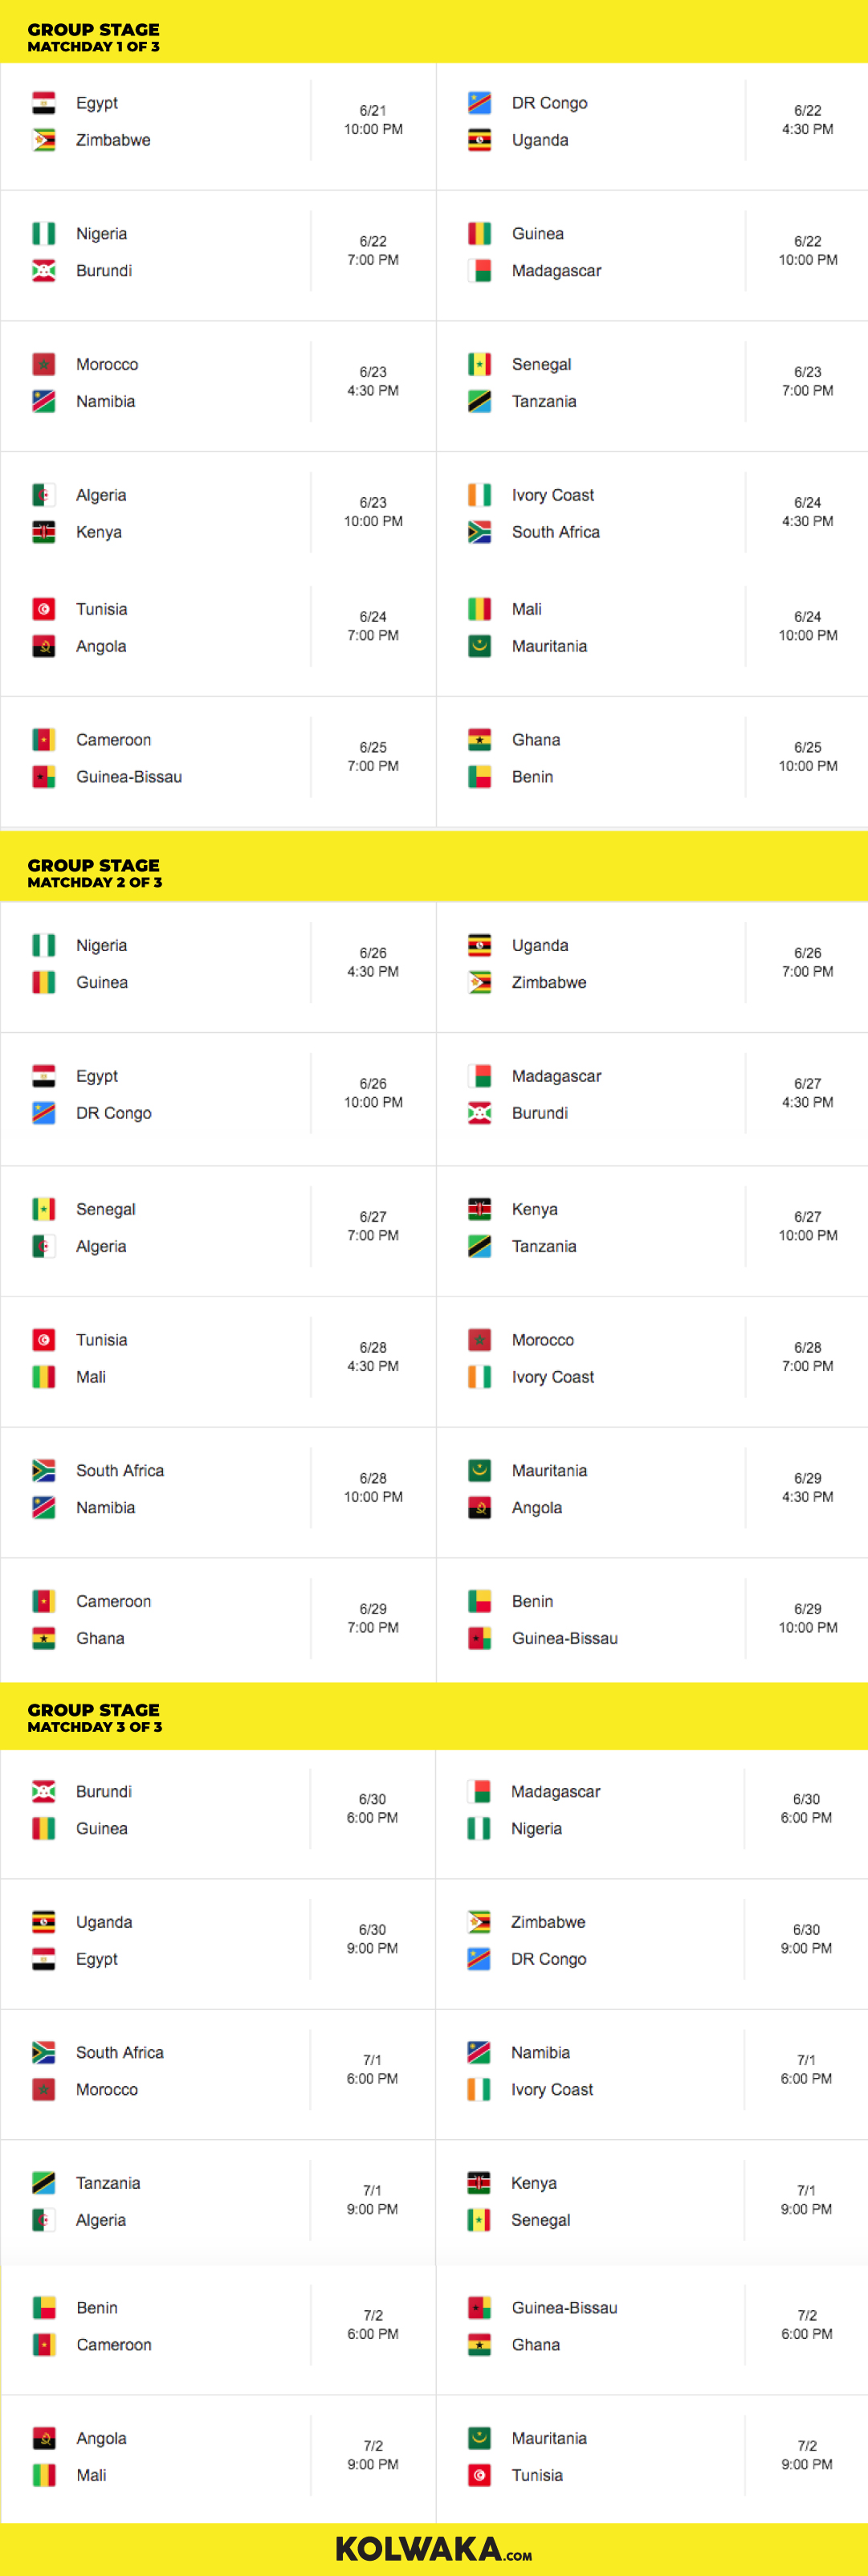 YOUR GUIDE TO AFRICA'S CUP OF NATIONS! | Kolwaka